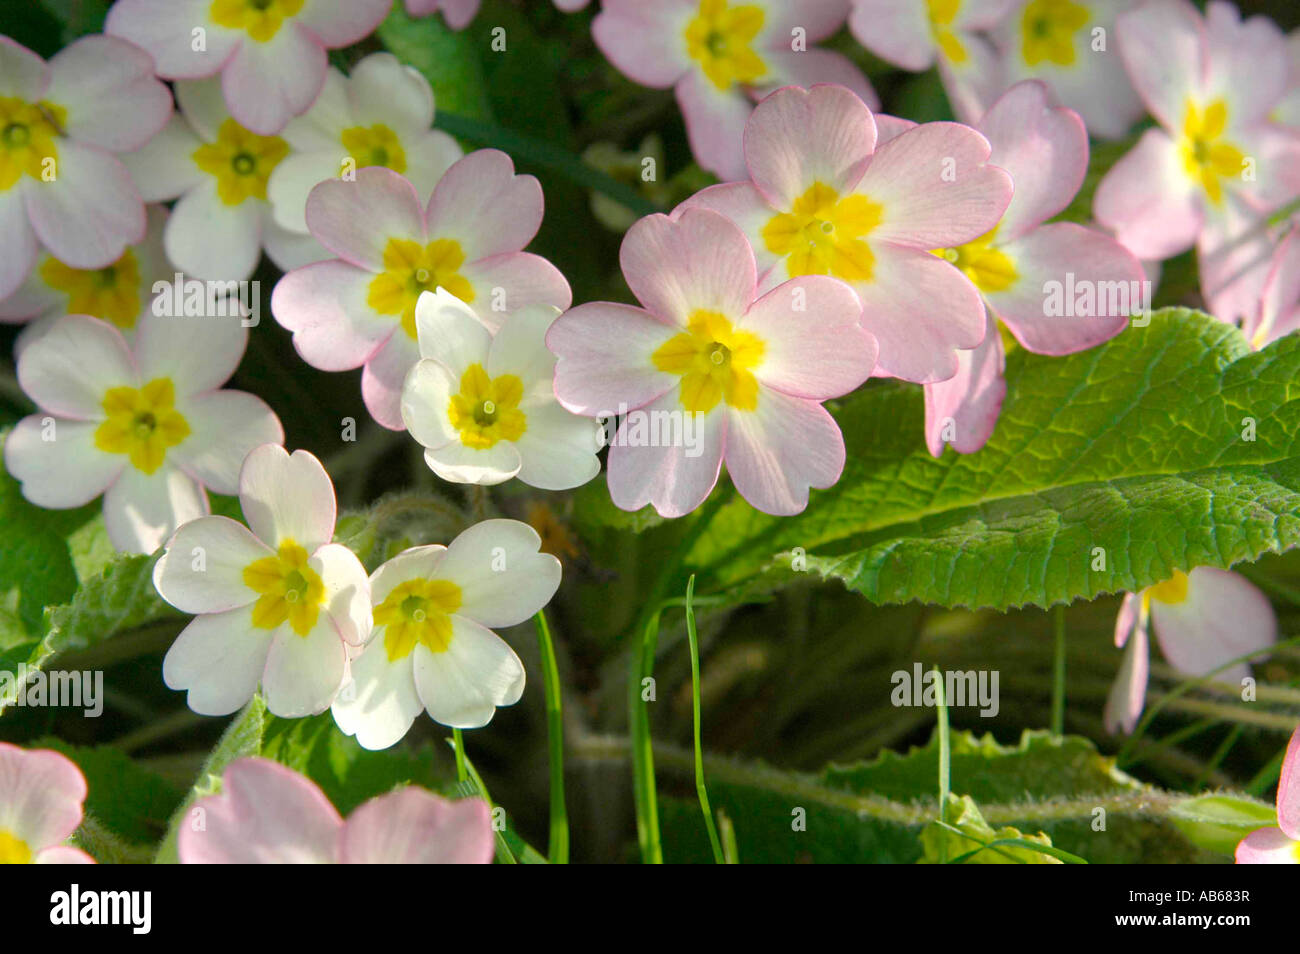 Primroses in yellow and pink varieties in the shade under a hedge sunshine through the petals early morning Stock Photo